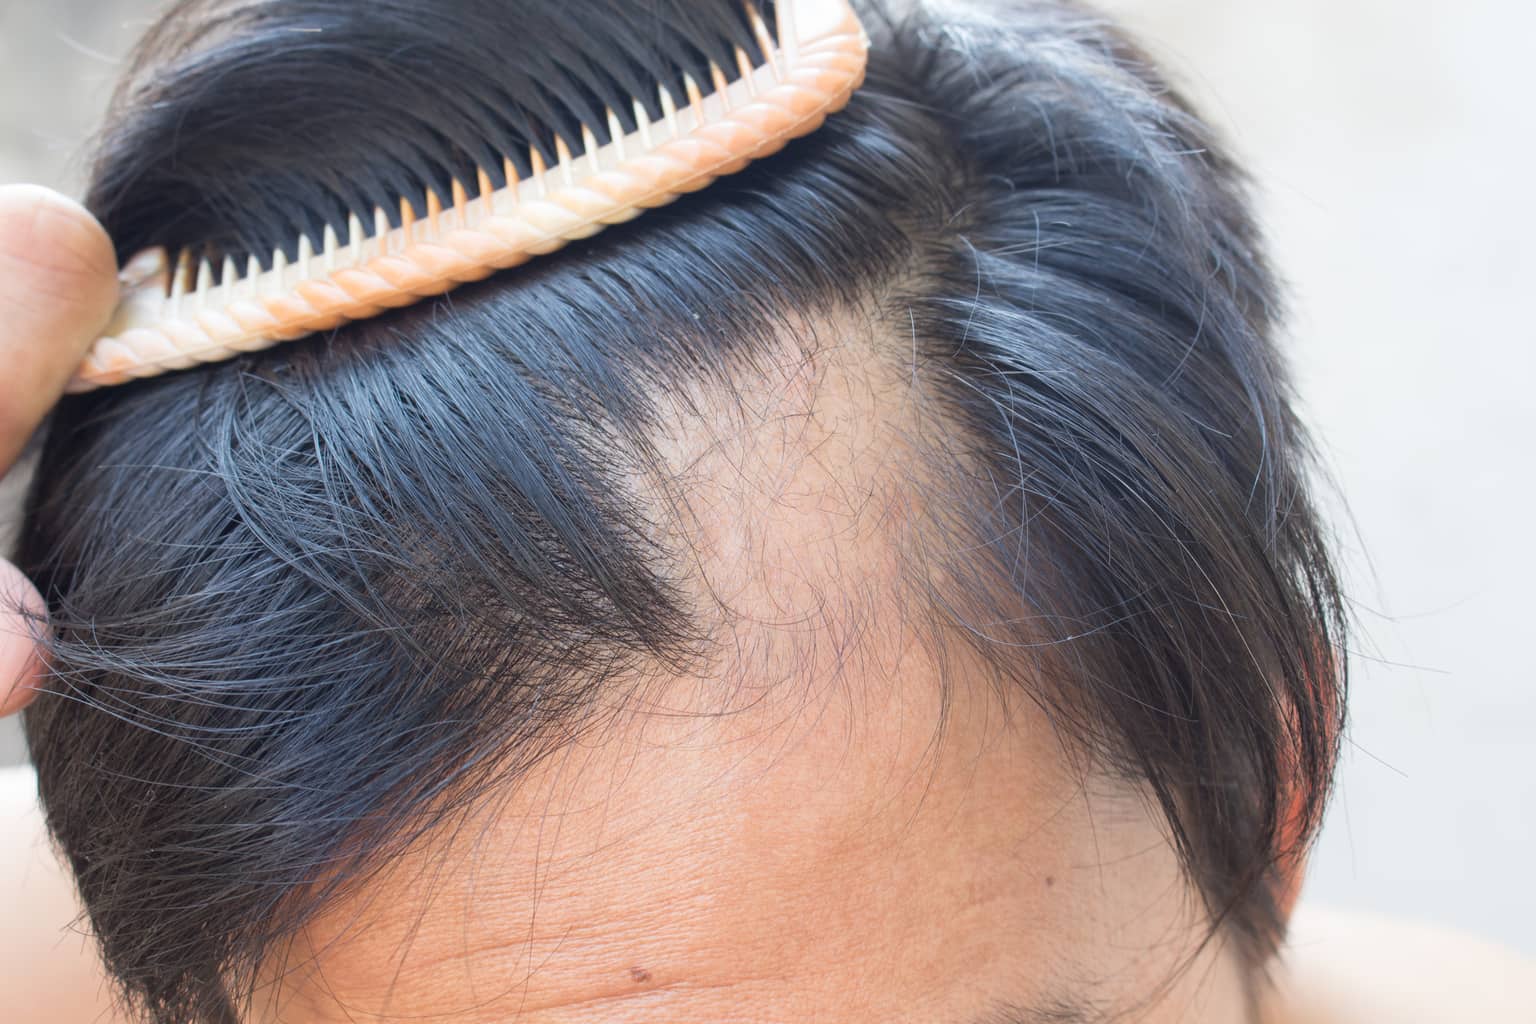 Insights On Hair Loss: Is DHT a Red Herring?